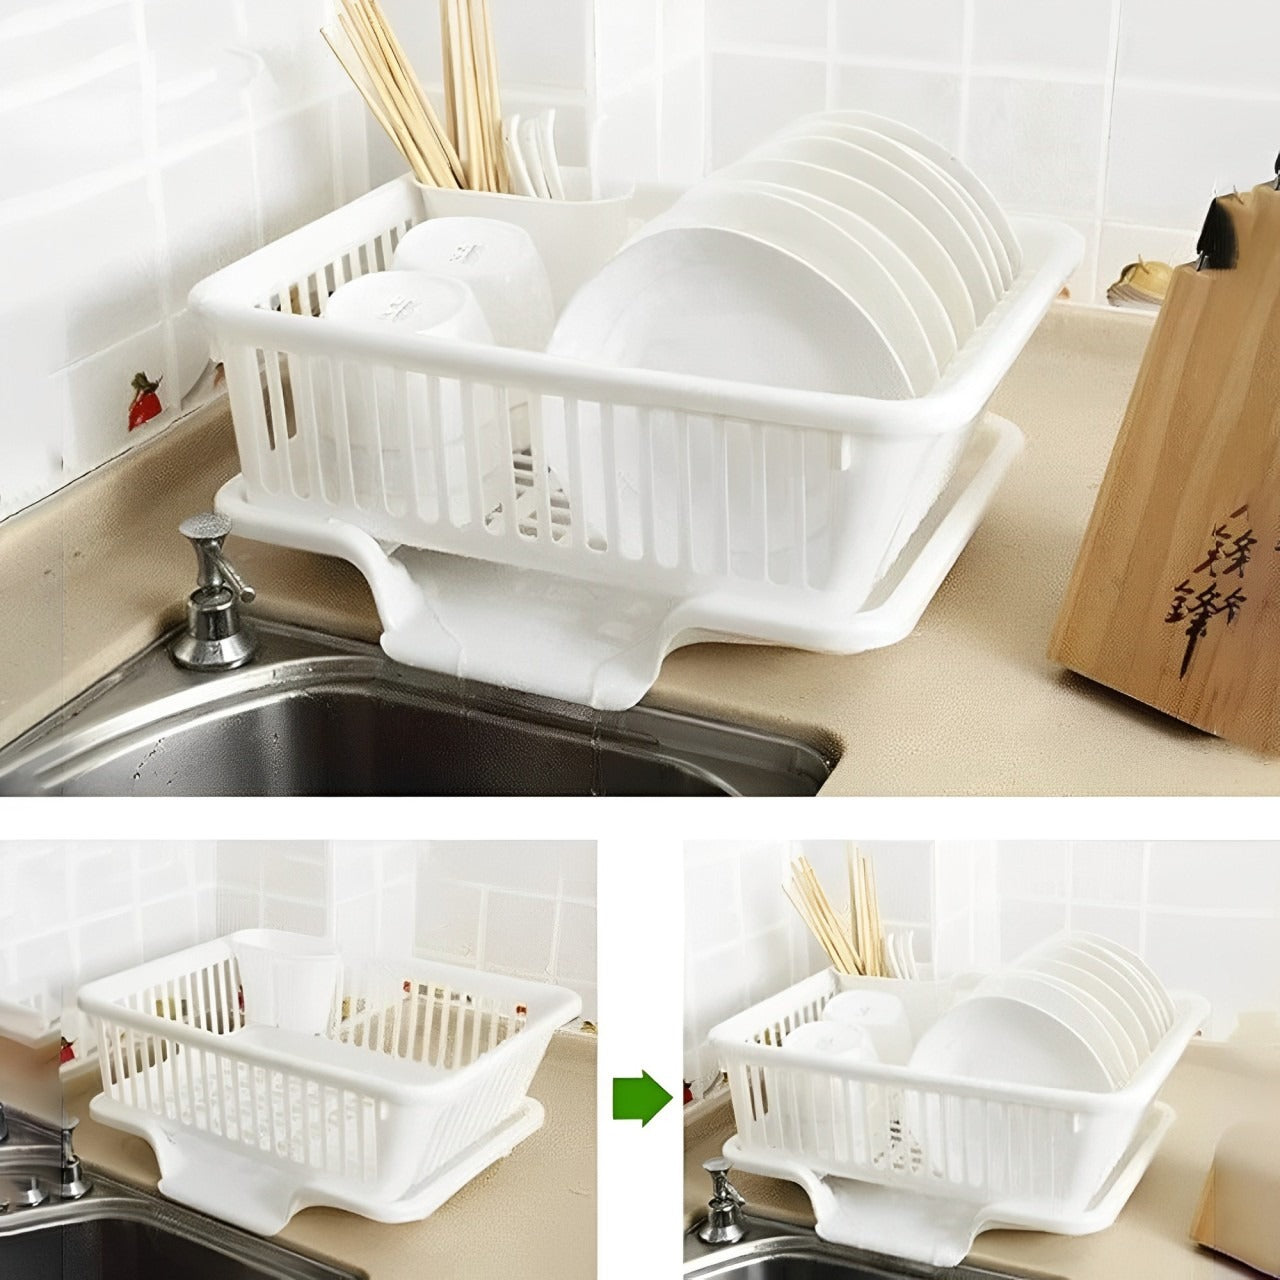 Dish Drainer Rack is Arranged on the Side of Sink.